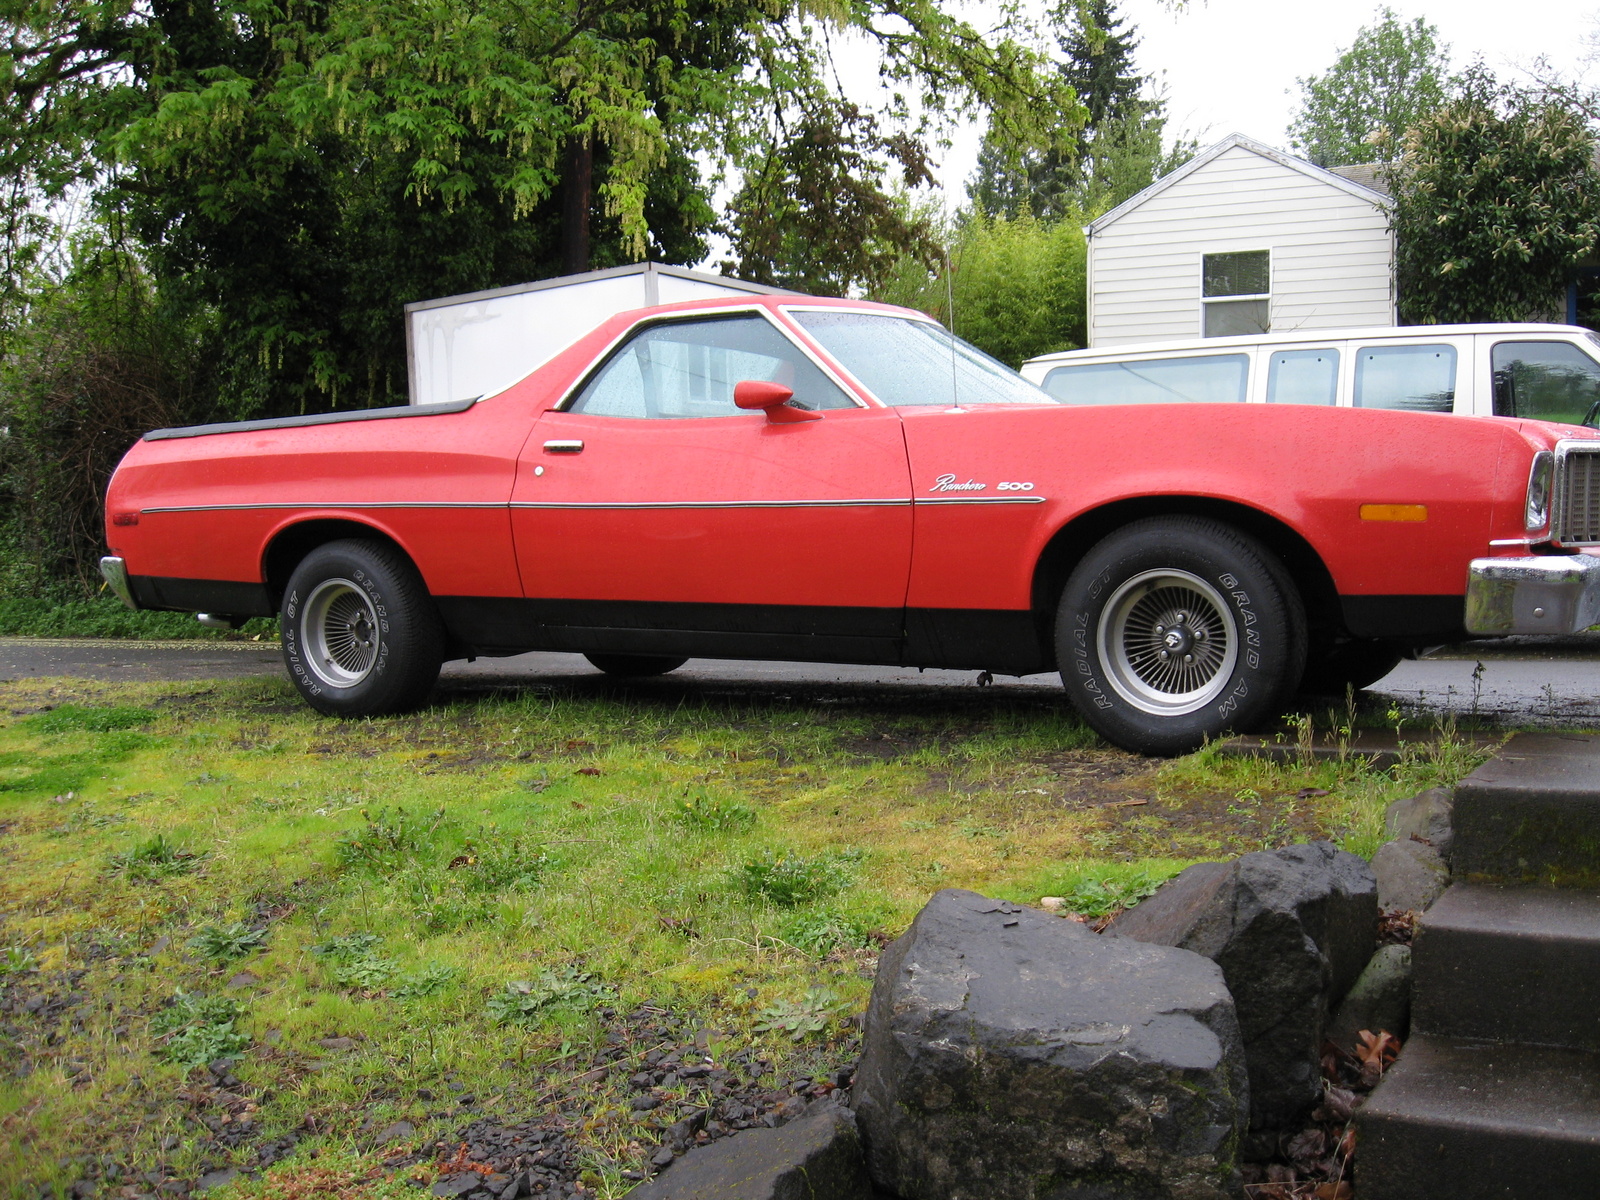 Need dims on a 1974 ford ranchero #7